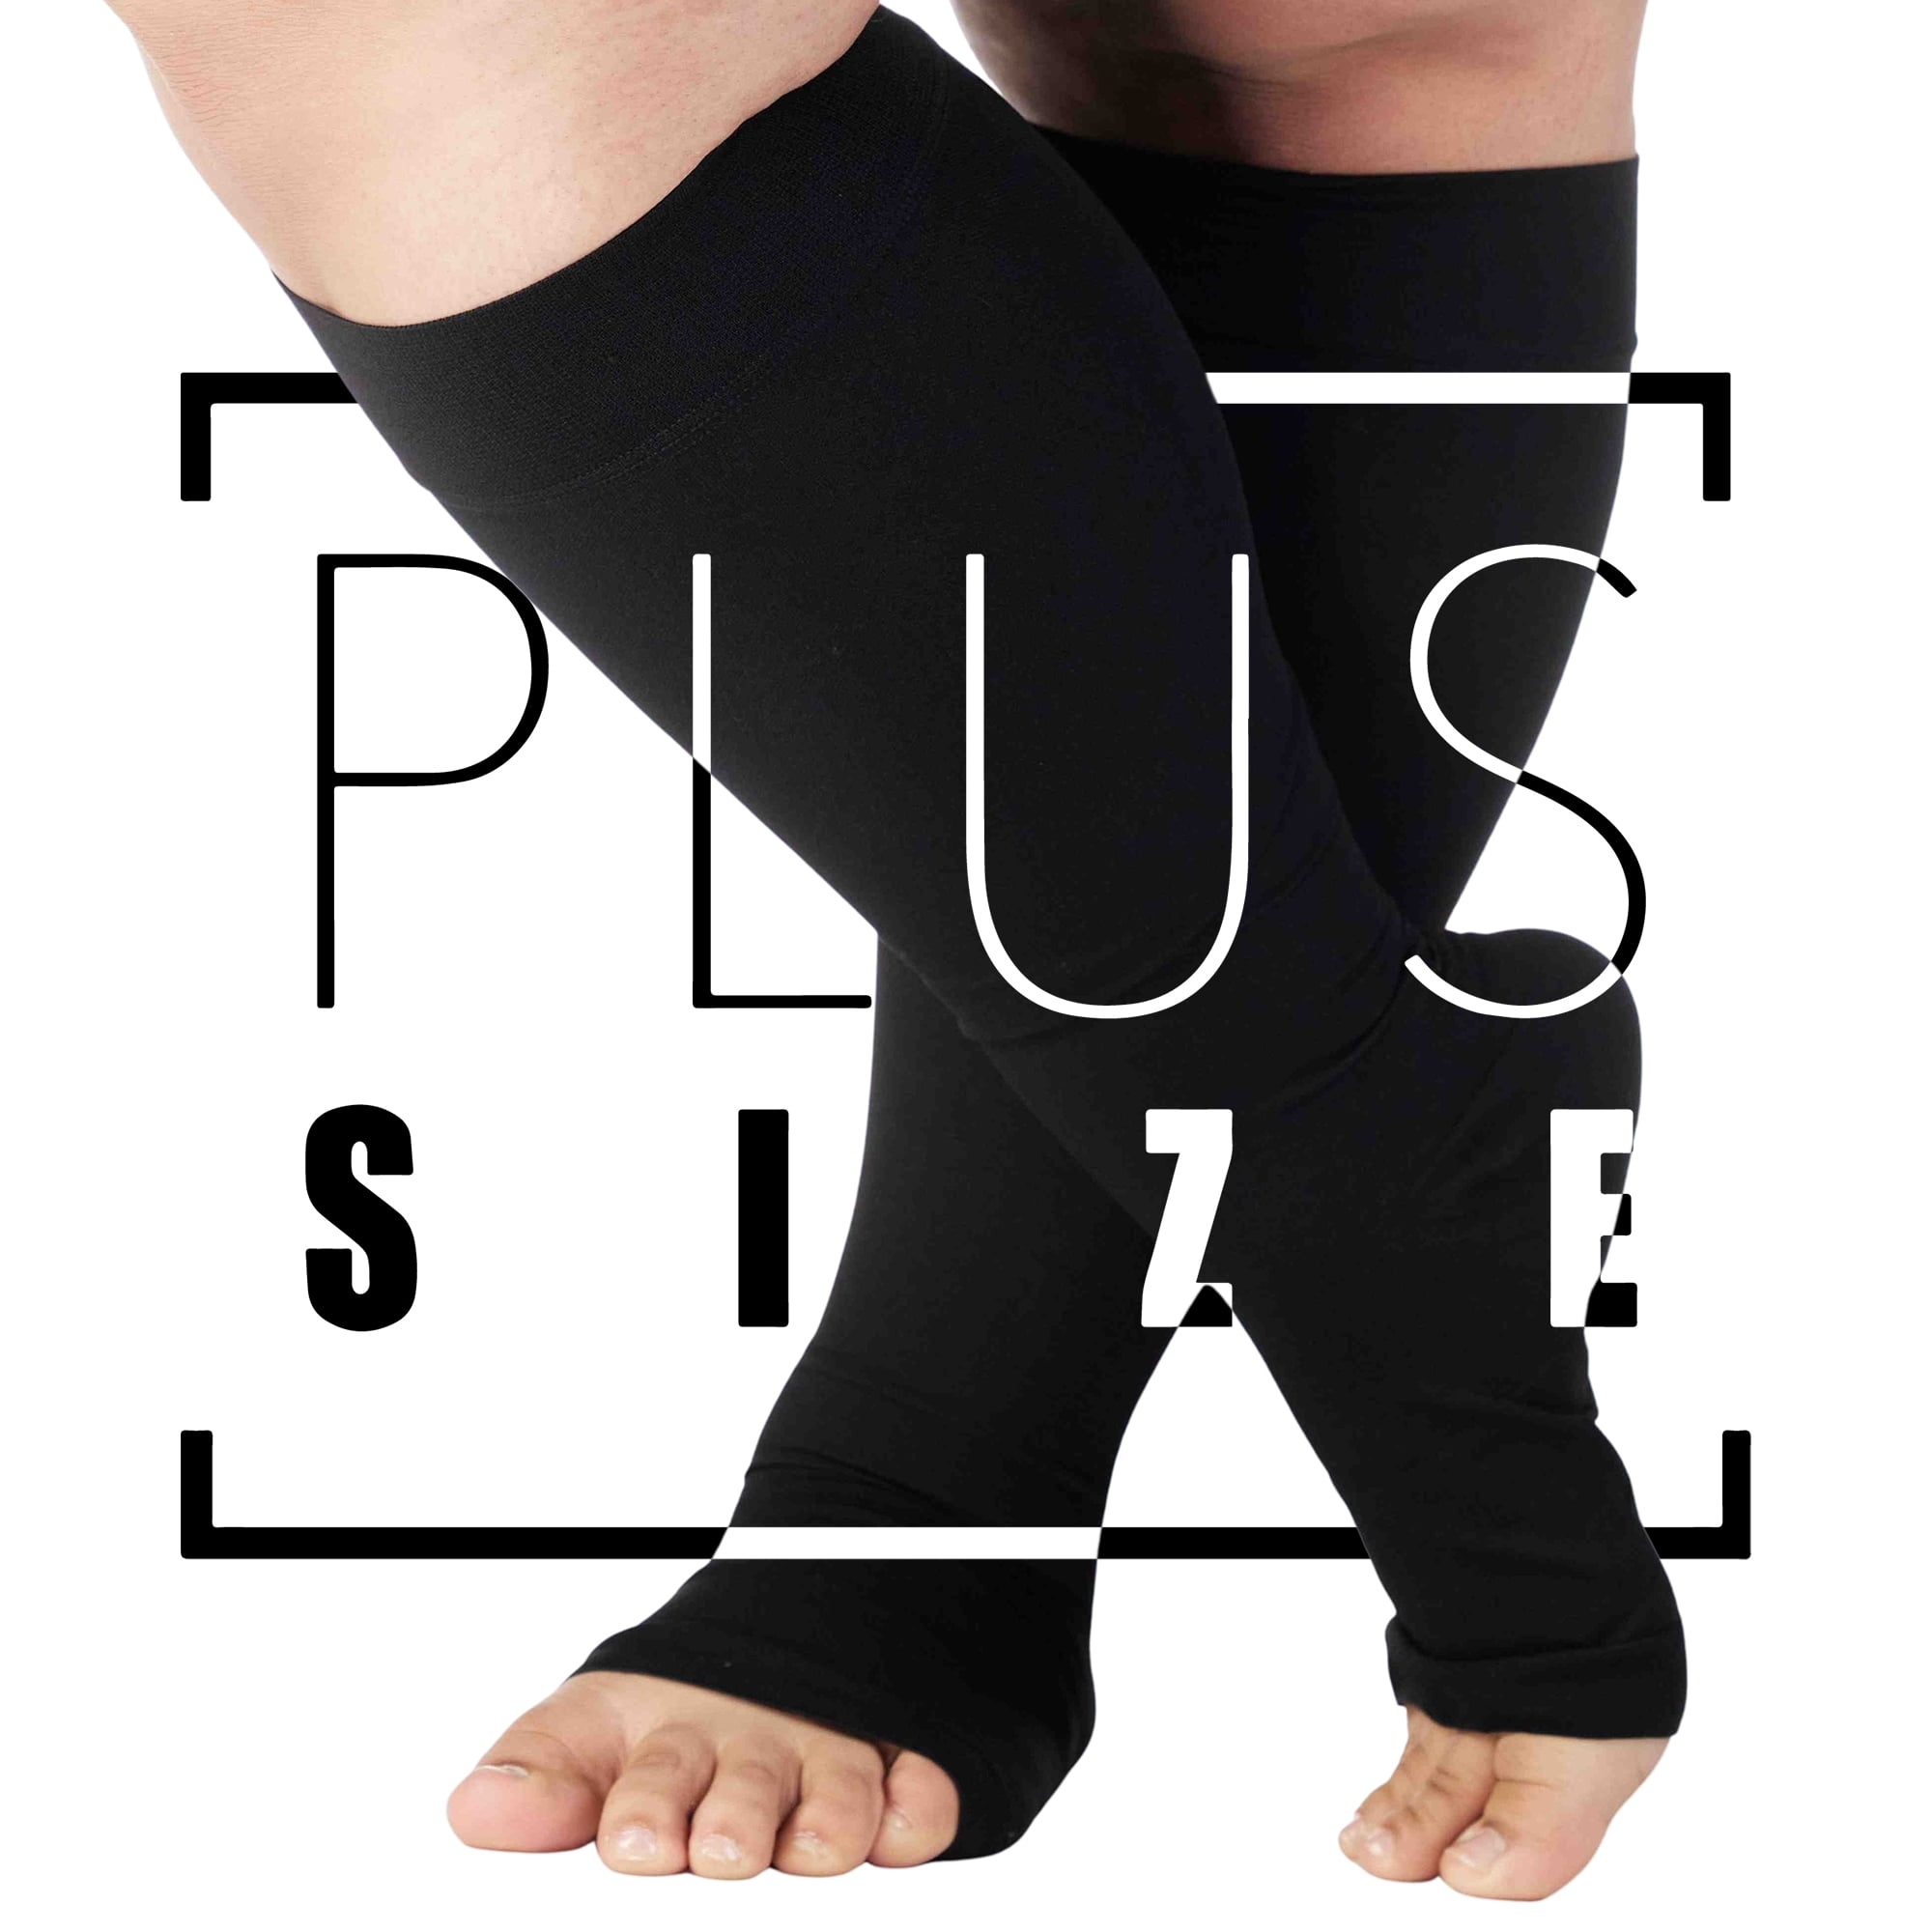 Plus Size Compression Tights for Women Circulation 20-30mmHg - Graduated  Support Stockings with Open Toe for Varicose Veins, Arthritis, Edema